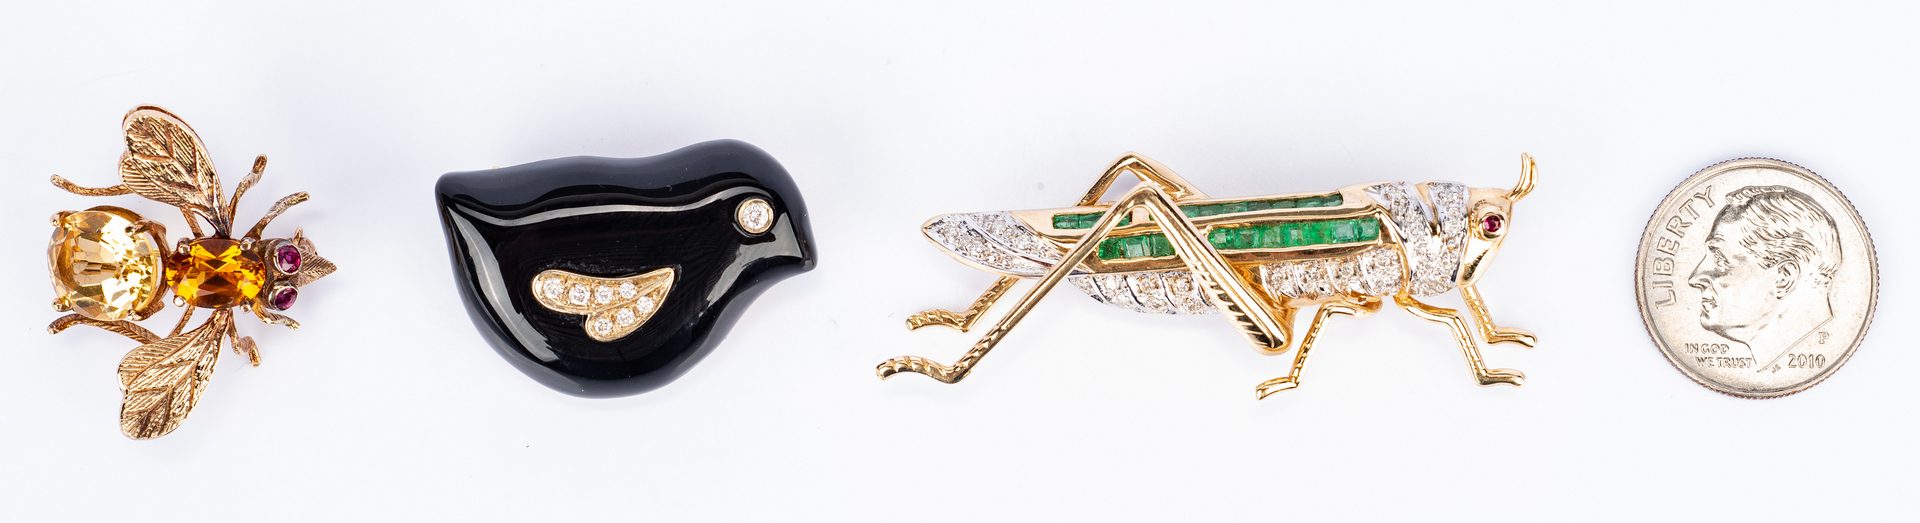 Lot 438: 3 Gemstone Insect and Bird Pins